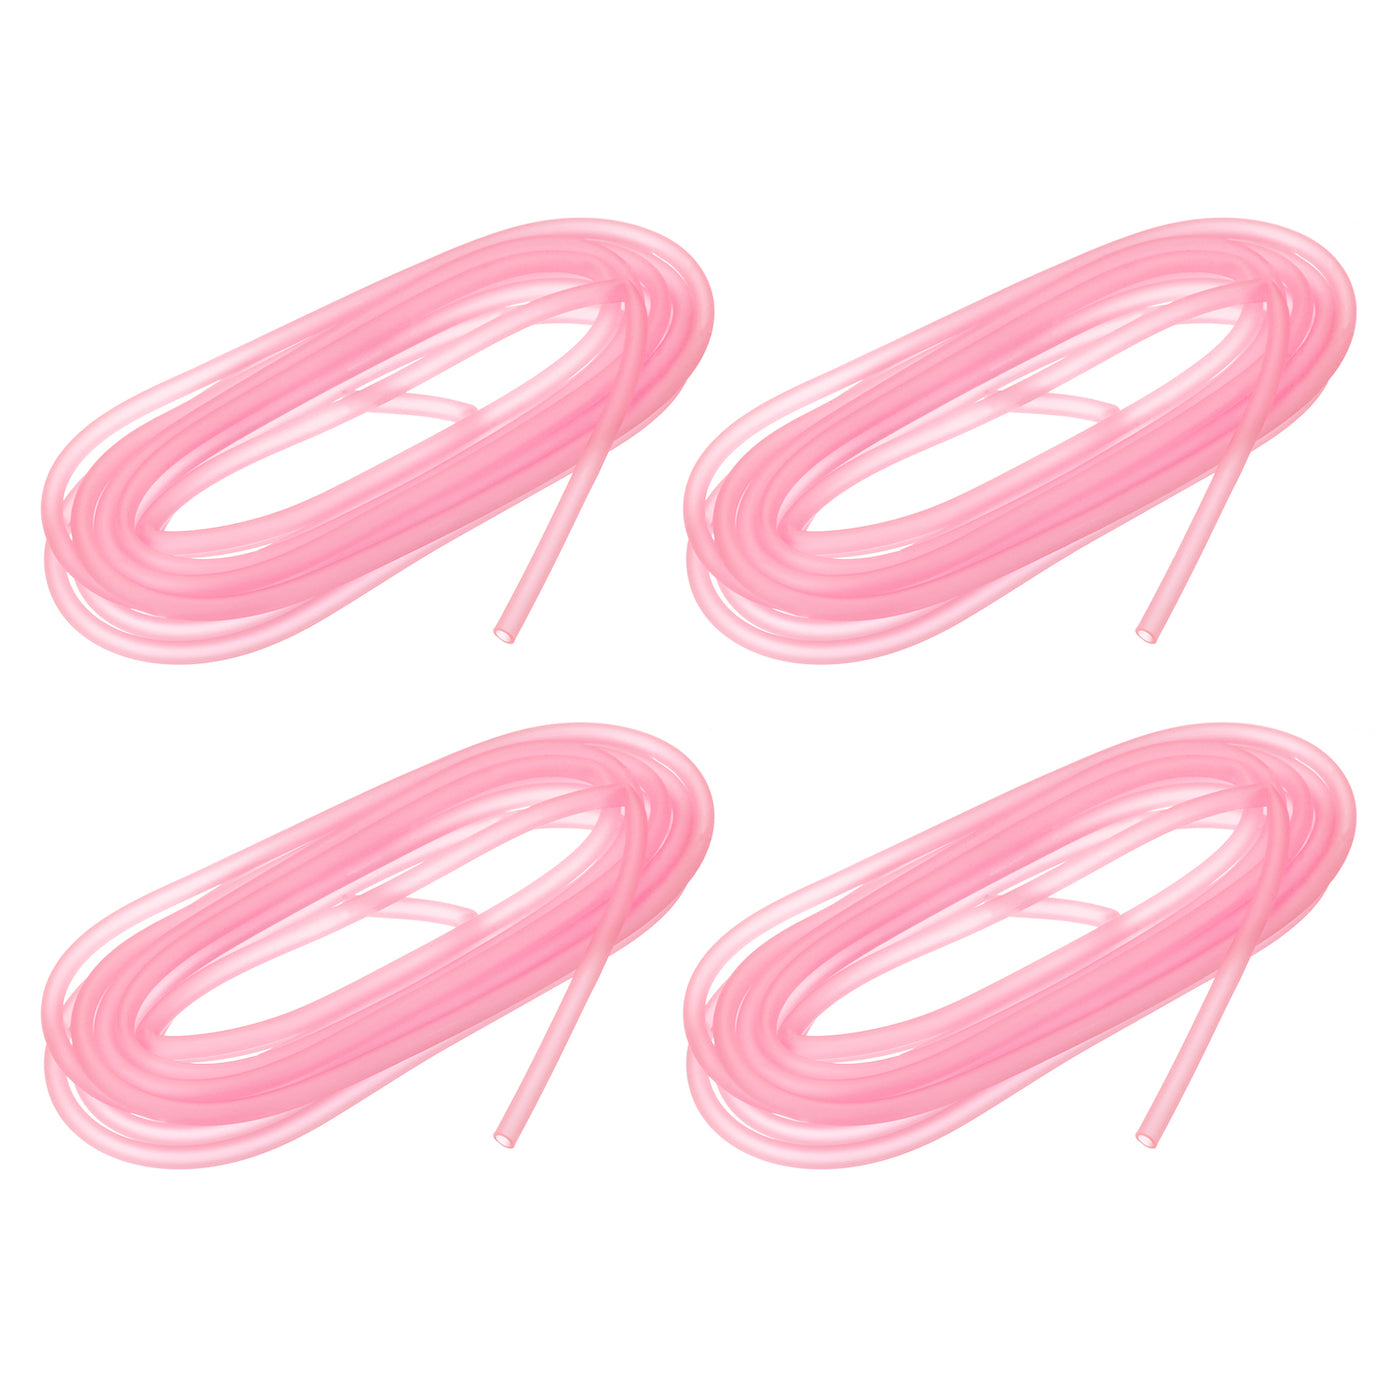 uxcell Uxcell Silicone Tubing 5/32" ID, 15/64" OD 4Pcs 13.12 Ft for Pump Transfer, Pink